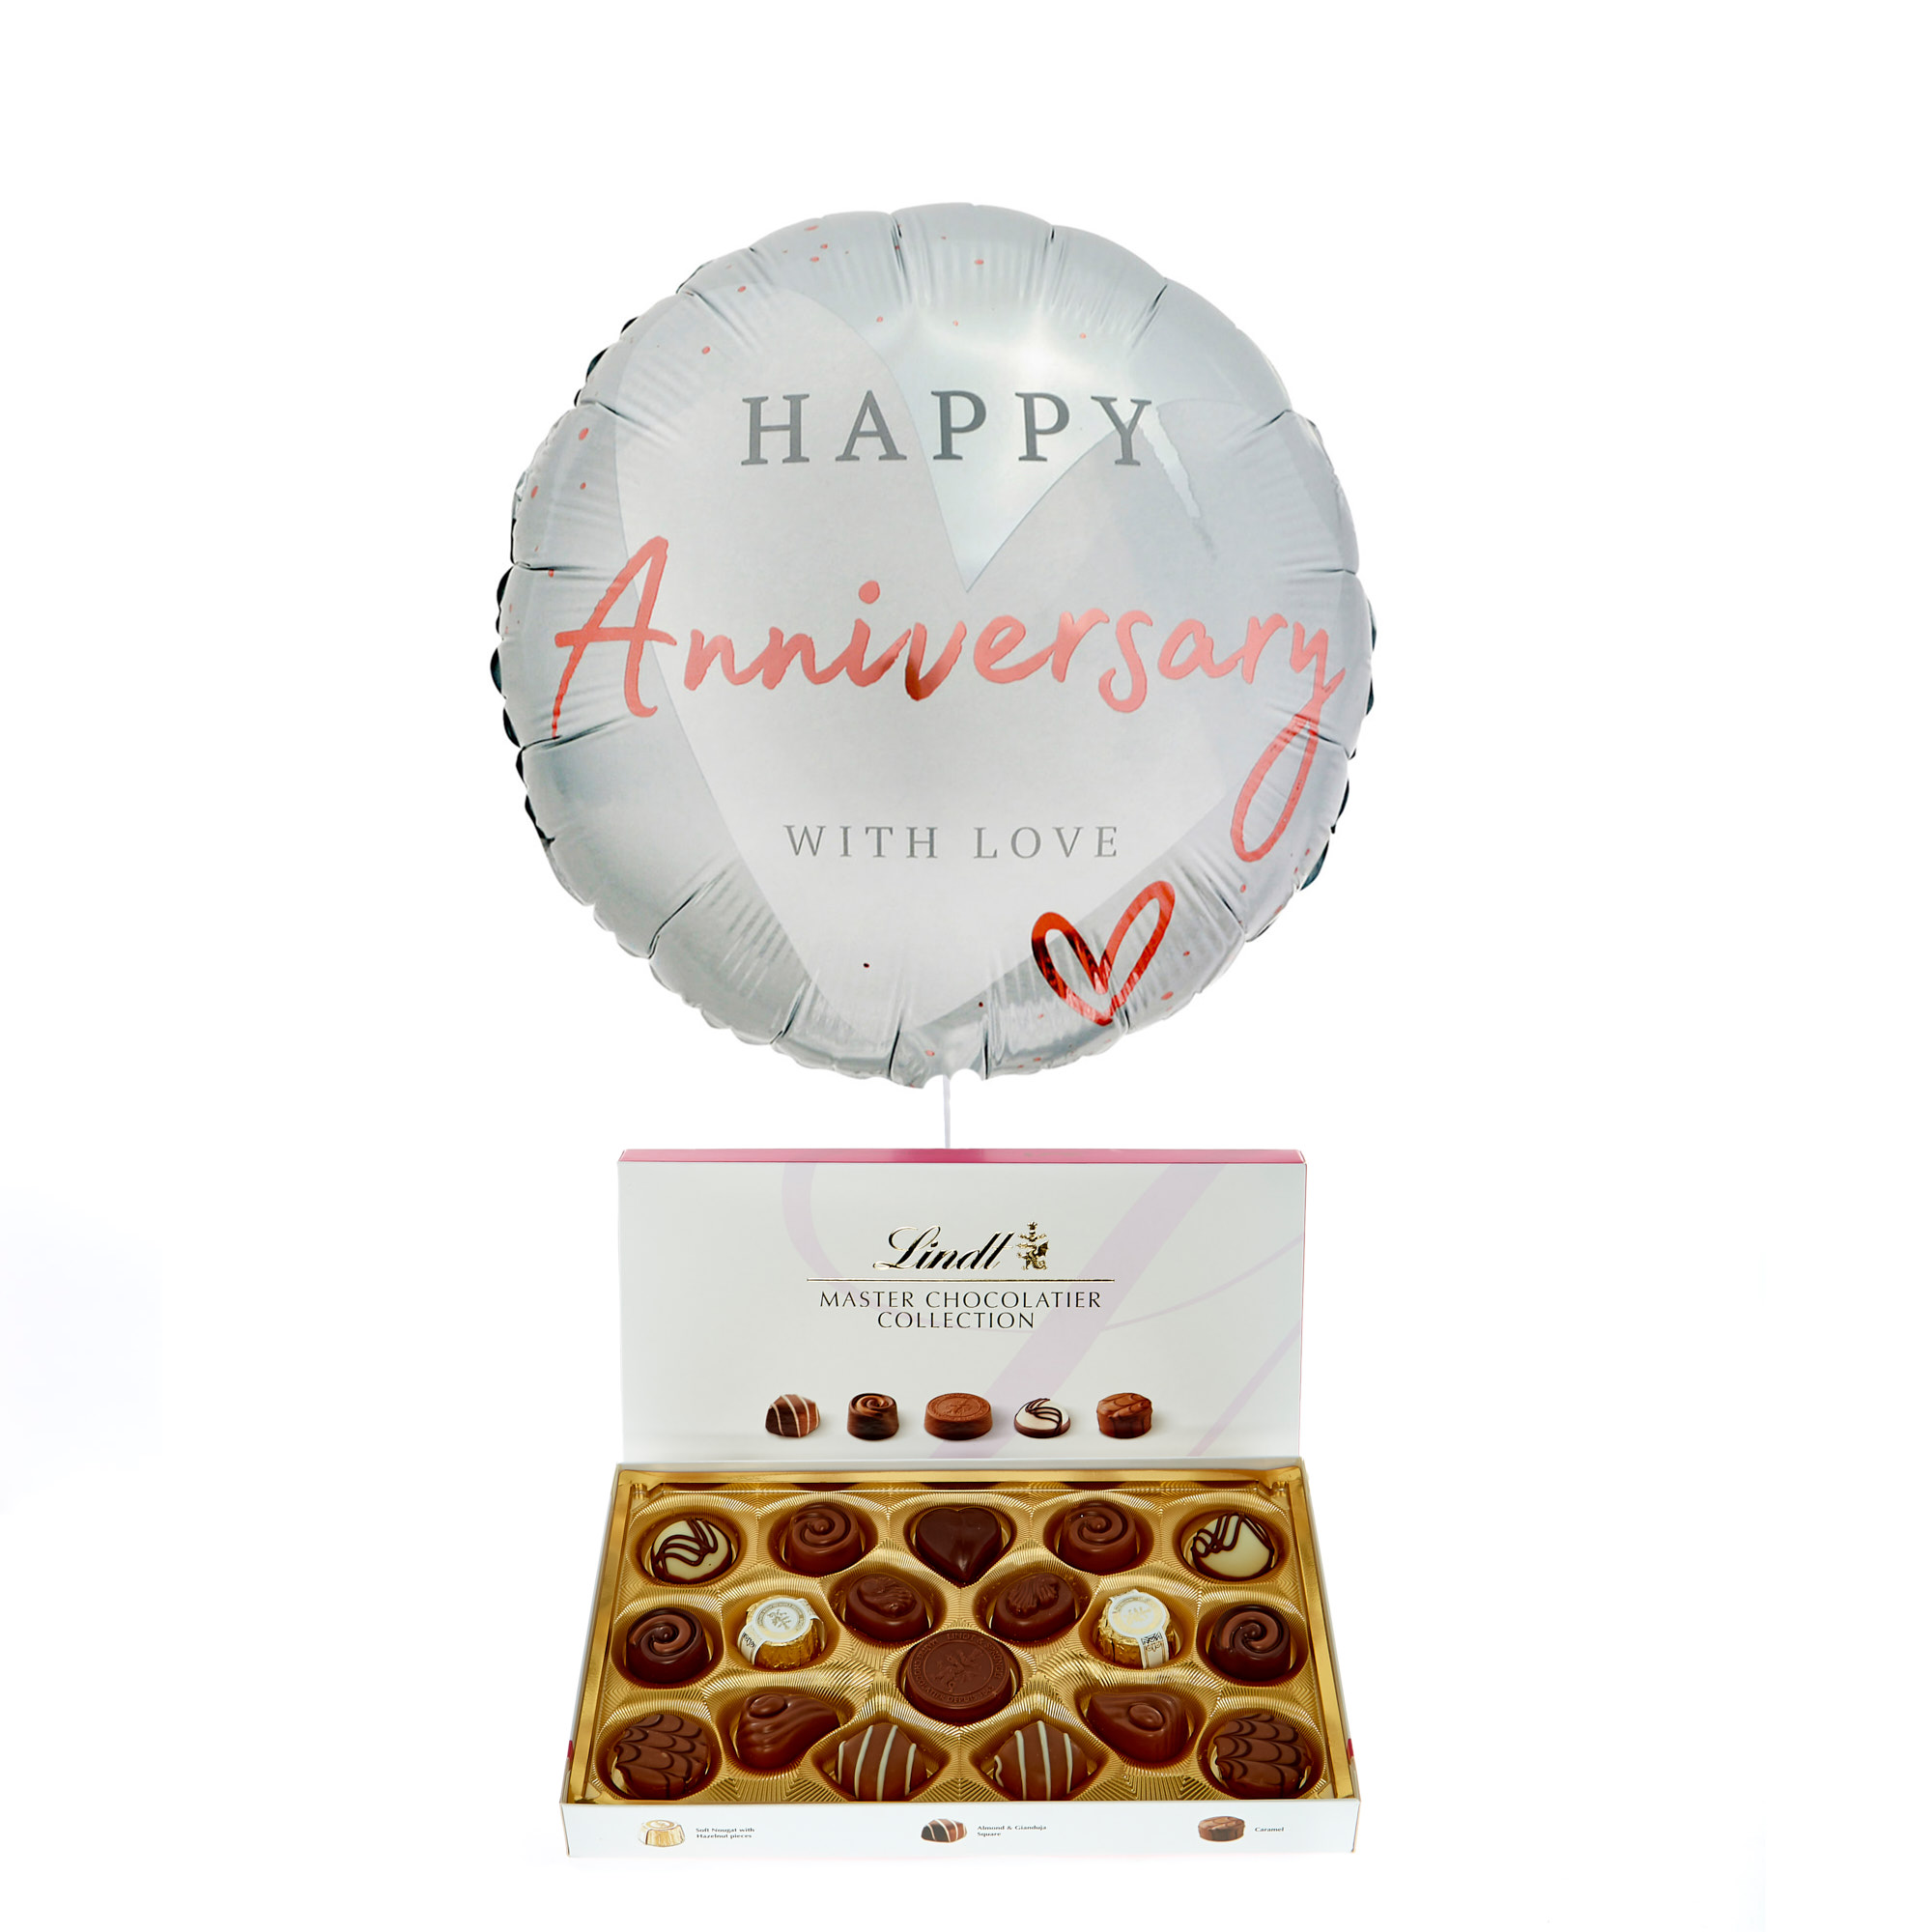 With Love Happy Anniversary Balloon & Lindt Chocolates - FREE GIFT CARD!